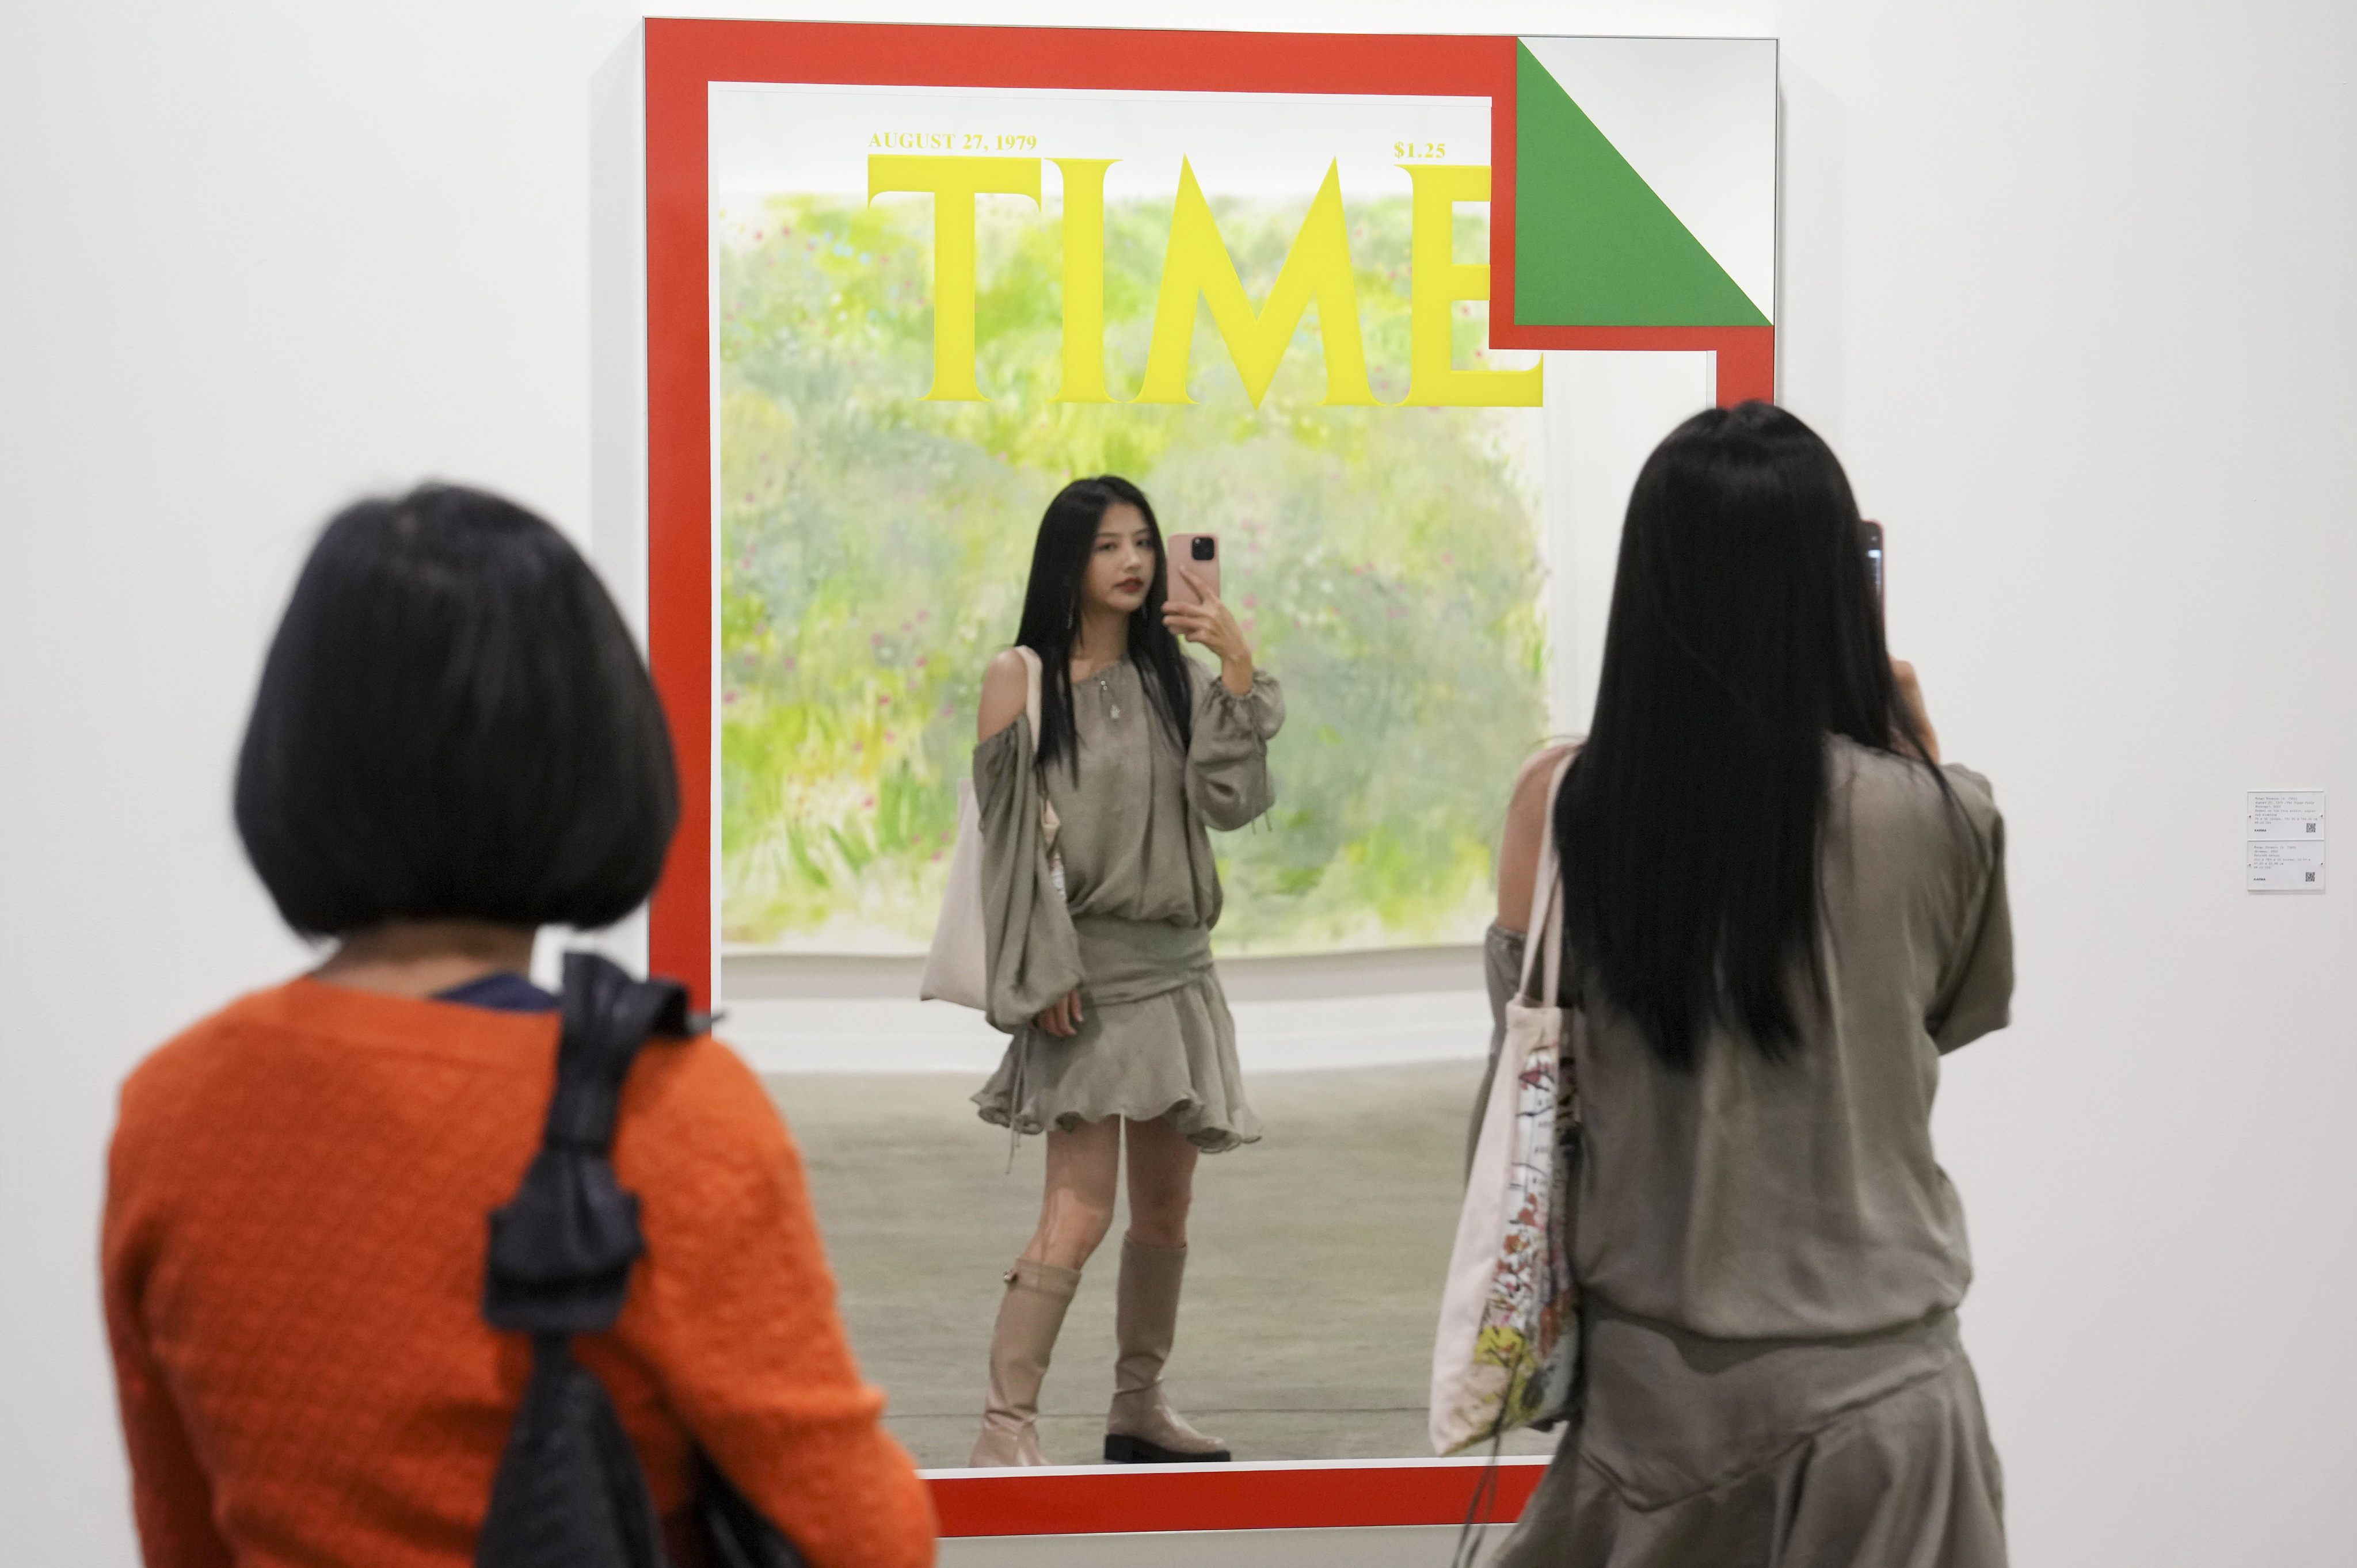 Art Basel Hong Kong 2023, the second day opening for invited people and parties. Picture shows an artwork “August 27, 1979 (The Topsy-Turvy Economy), 2022” - Mungo Thomson. Photo: Elson Li